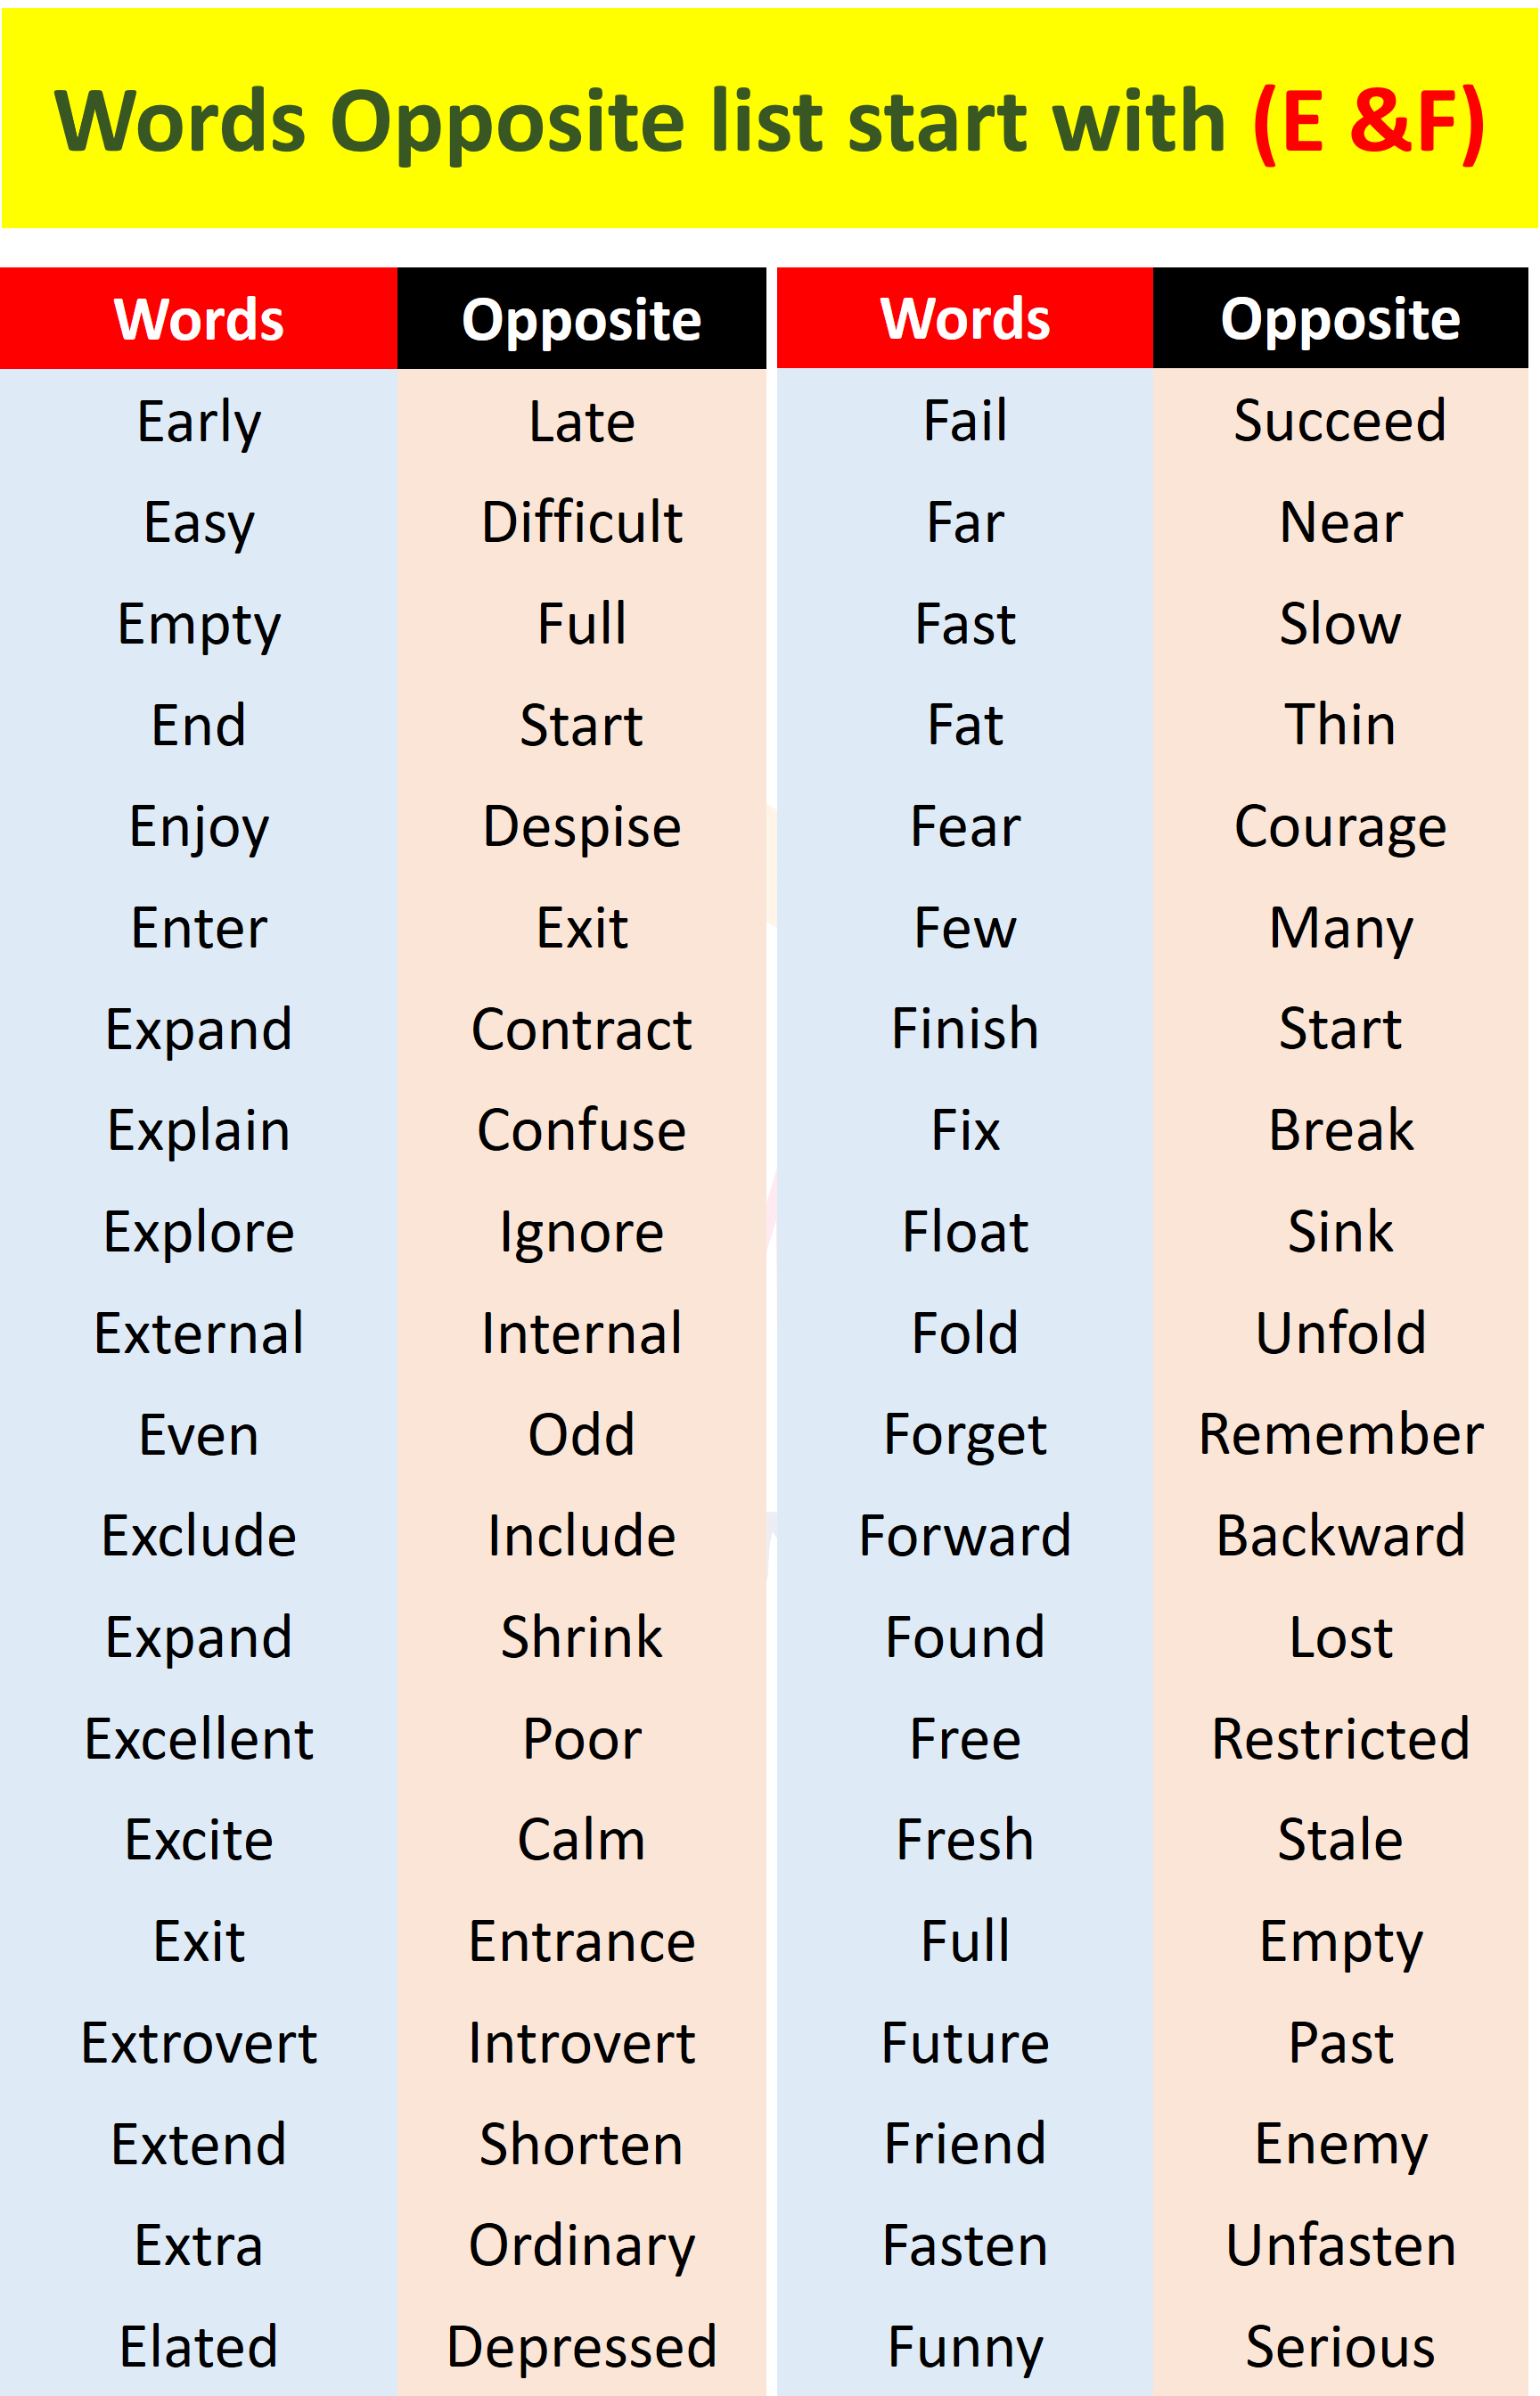 Words Opposite List From A to Z | Words Opposite E & F